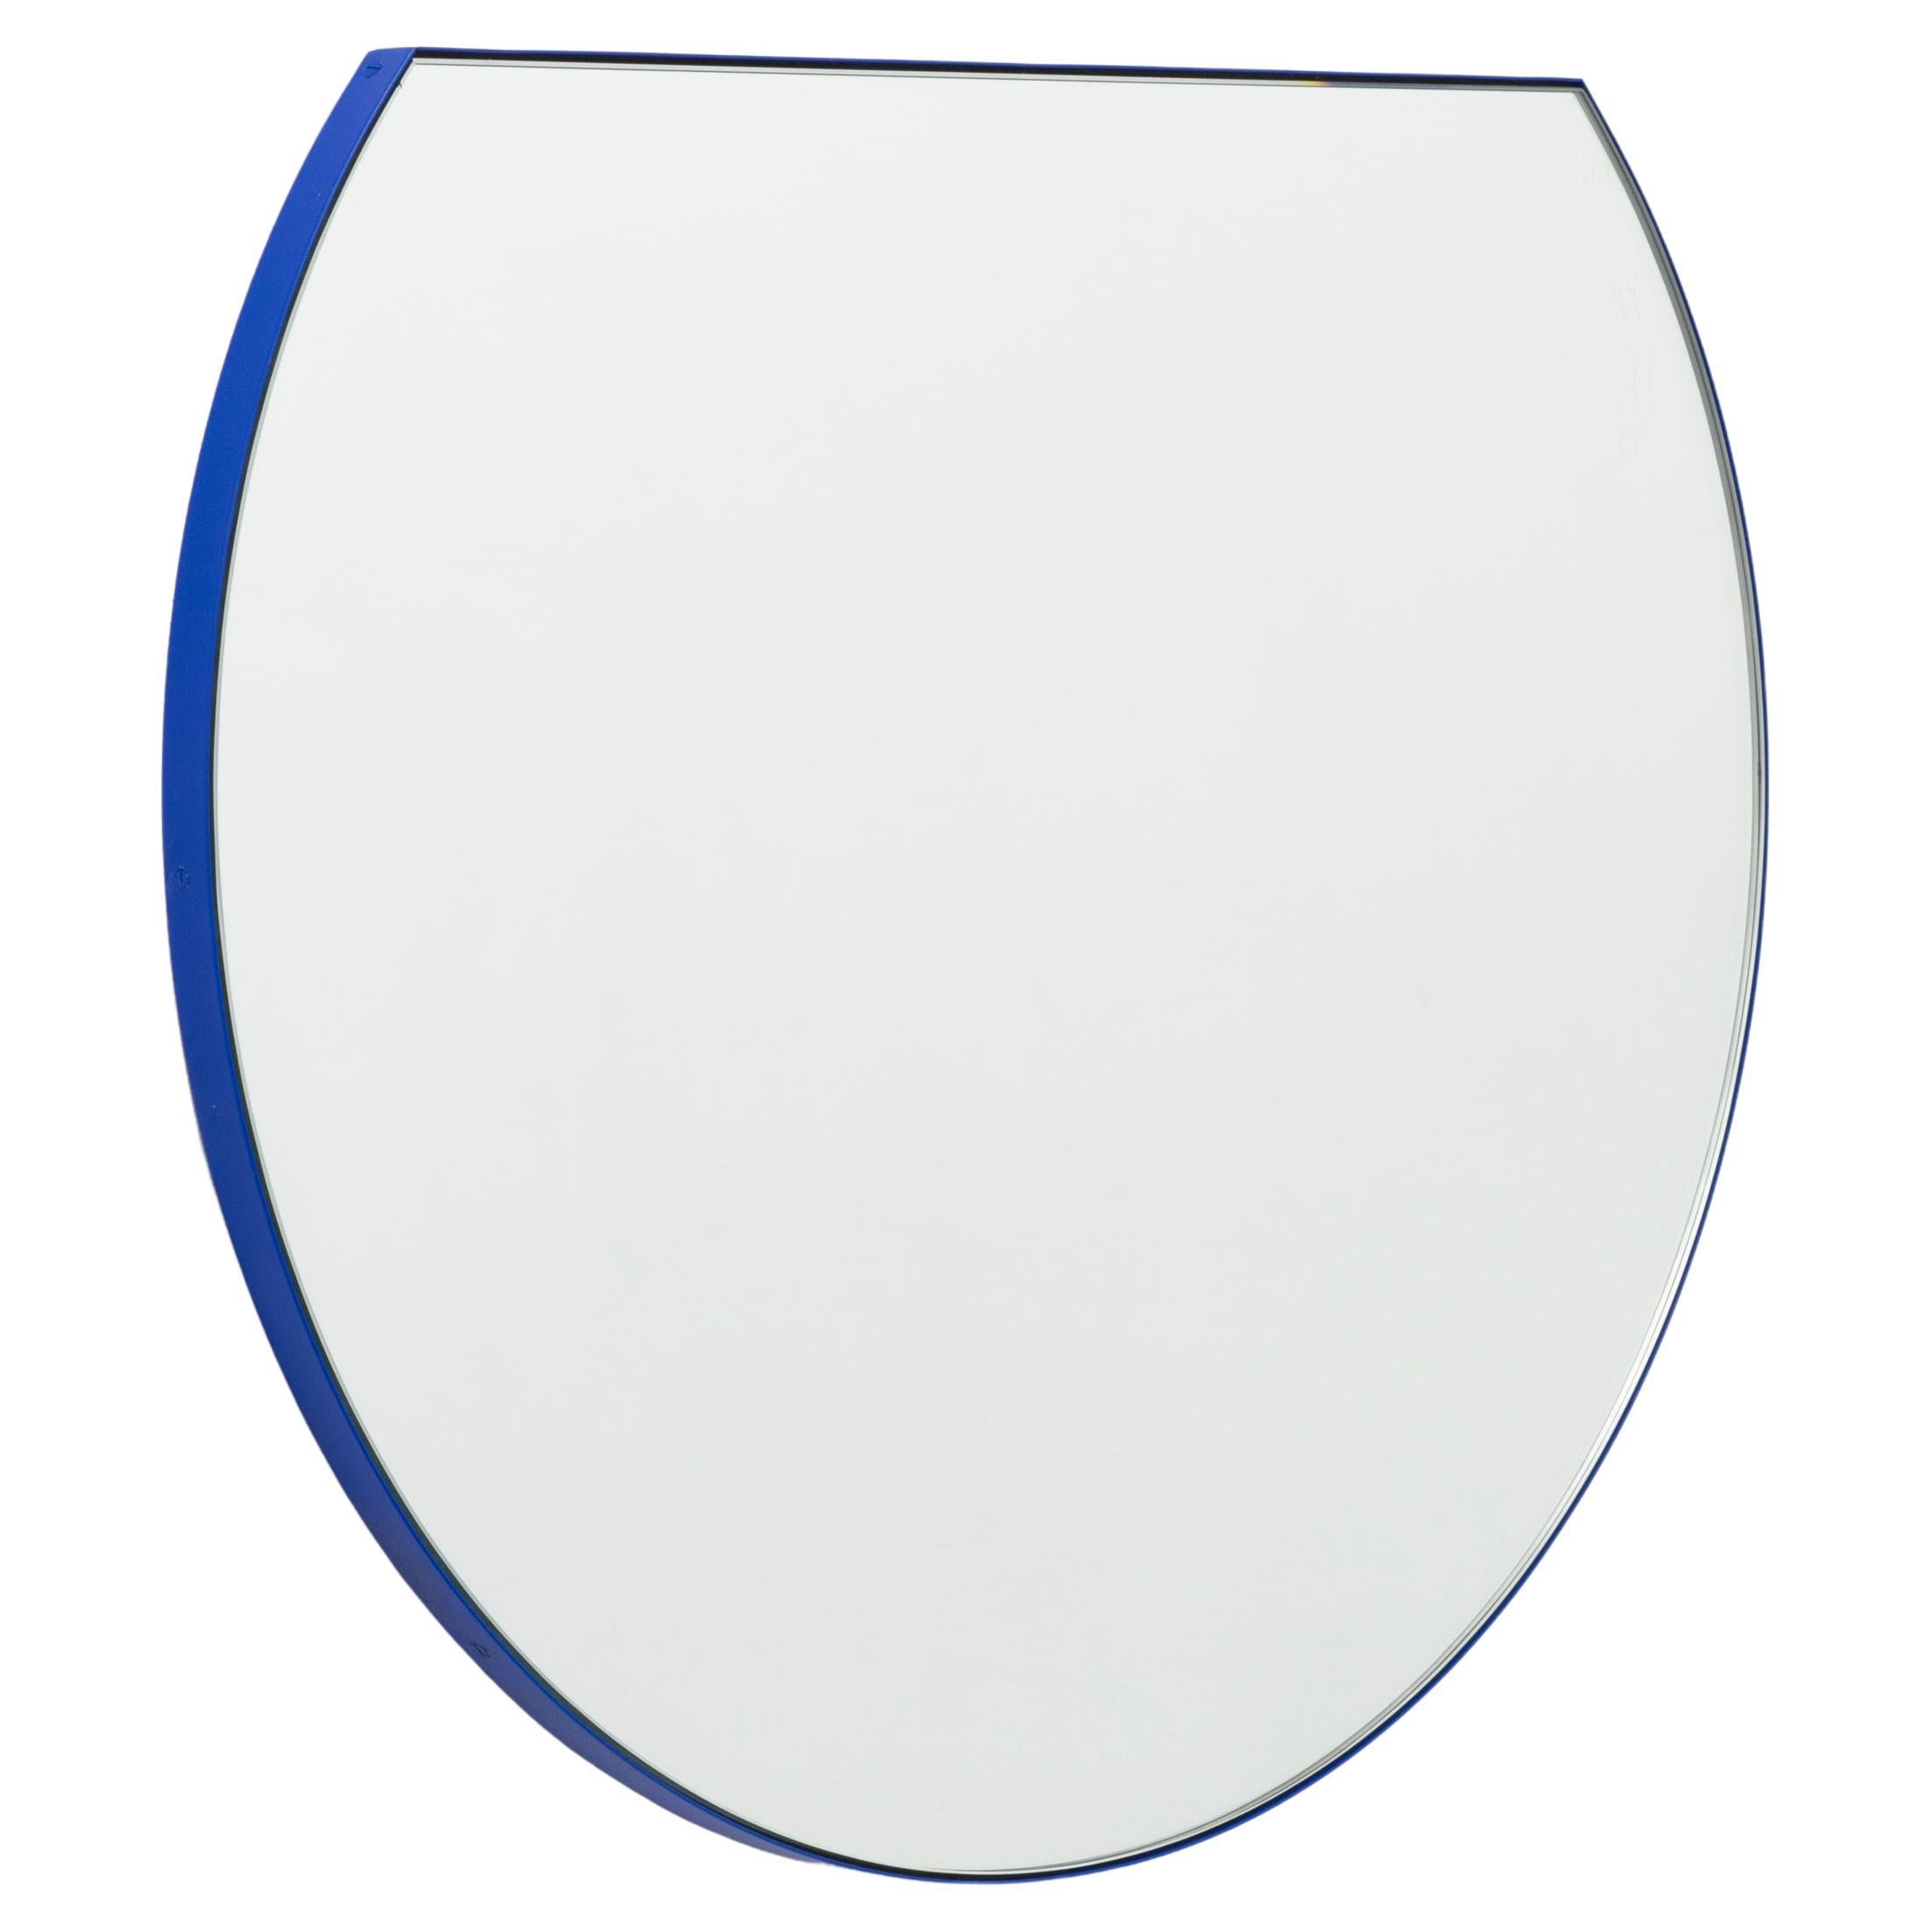 Orbis Trecus Cropped Circular Modern Mirror with Blue Frame, Customisable, Small